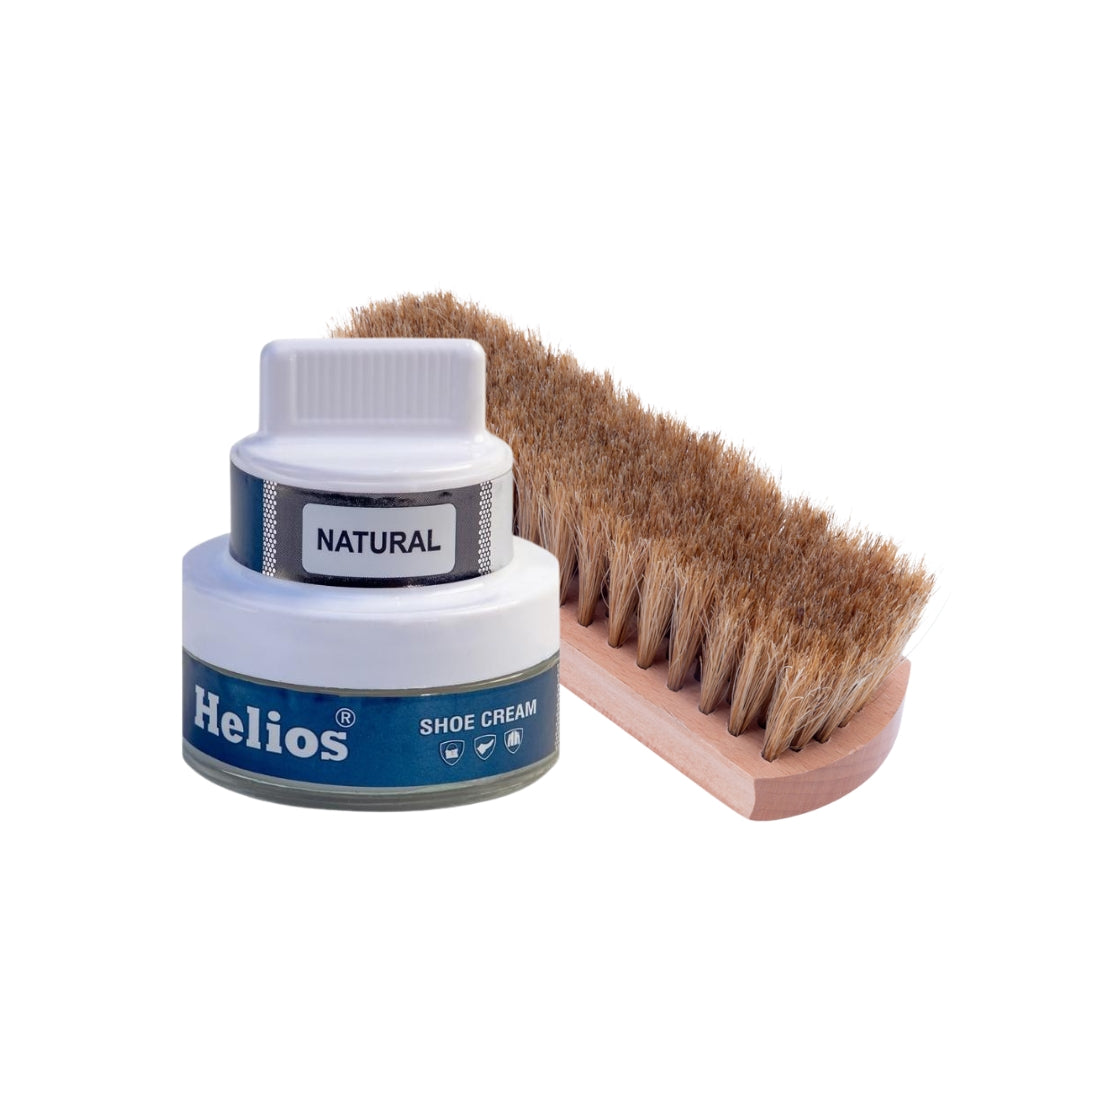 Helios Shoe Cream Glass Jar with Applicator with Helios Horse Hair Shoe Brush - (Light Brown, 6.5 Inch)